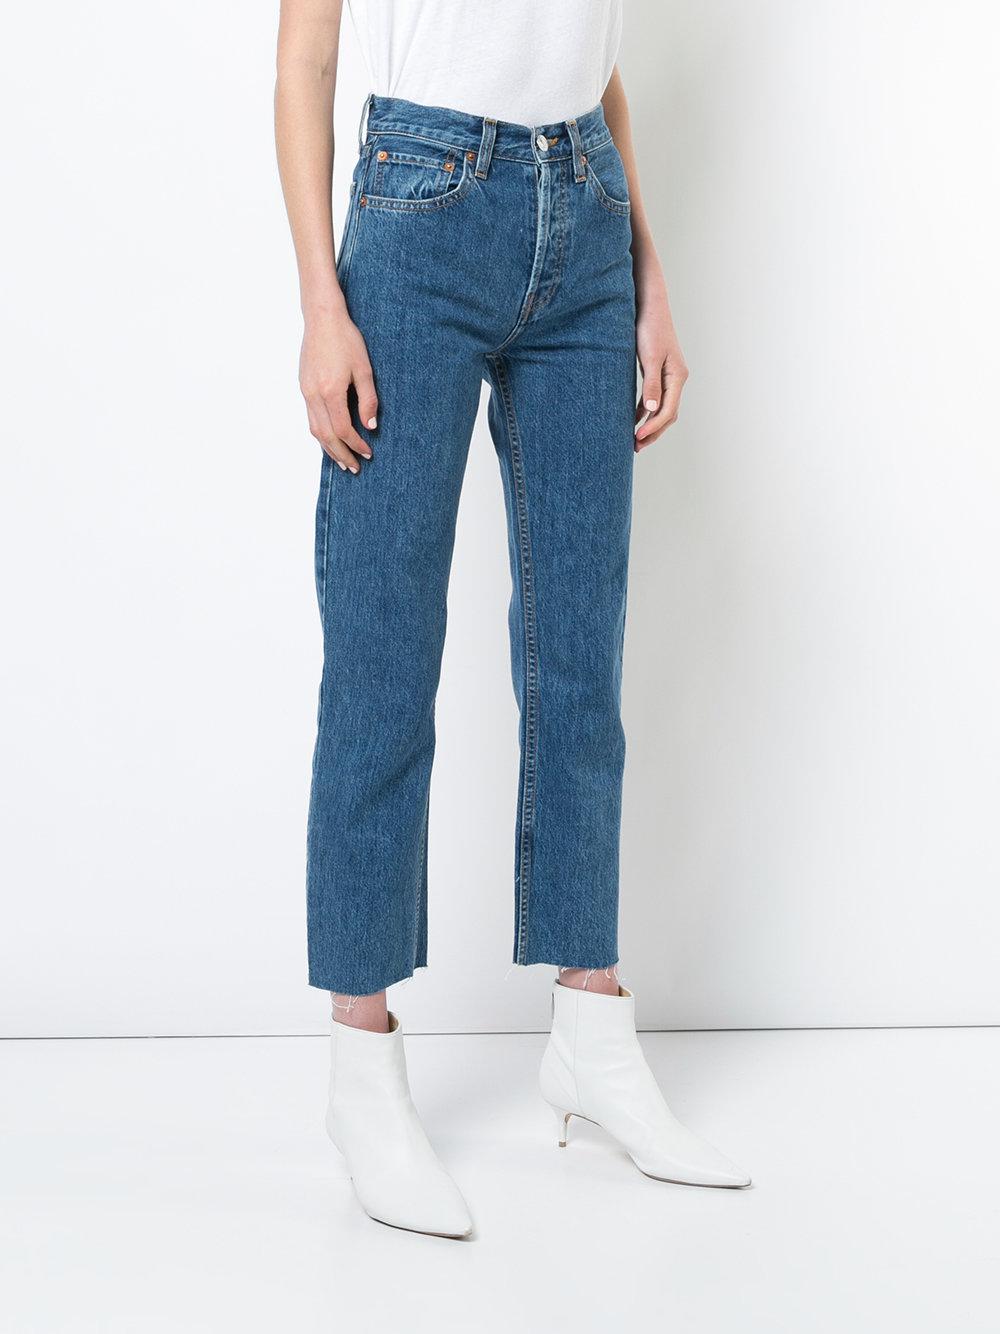 RE/DONE Denim Cropped High Waisted Jeans in Blue - Lyst